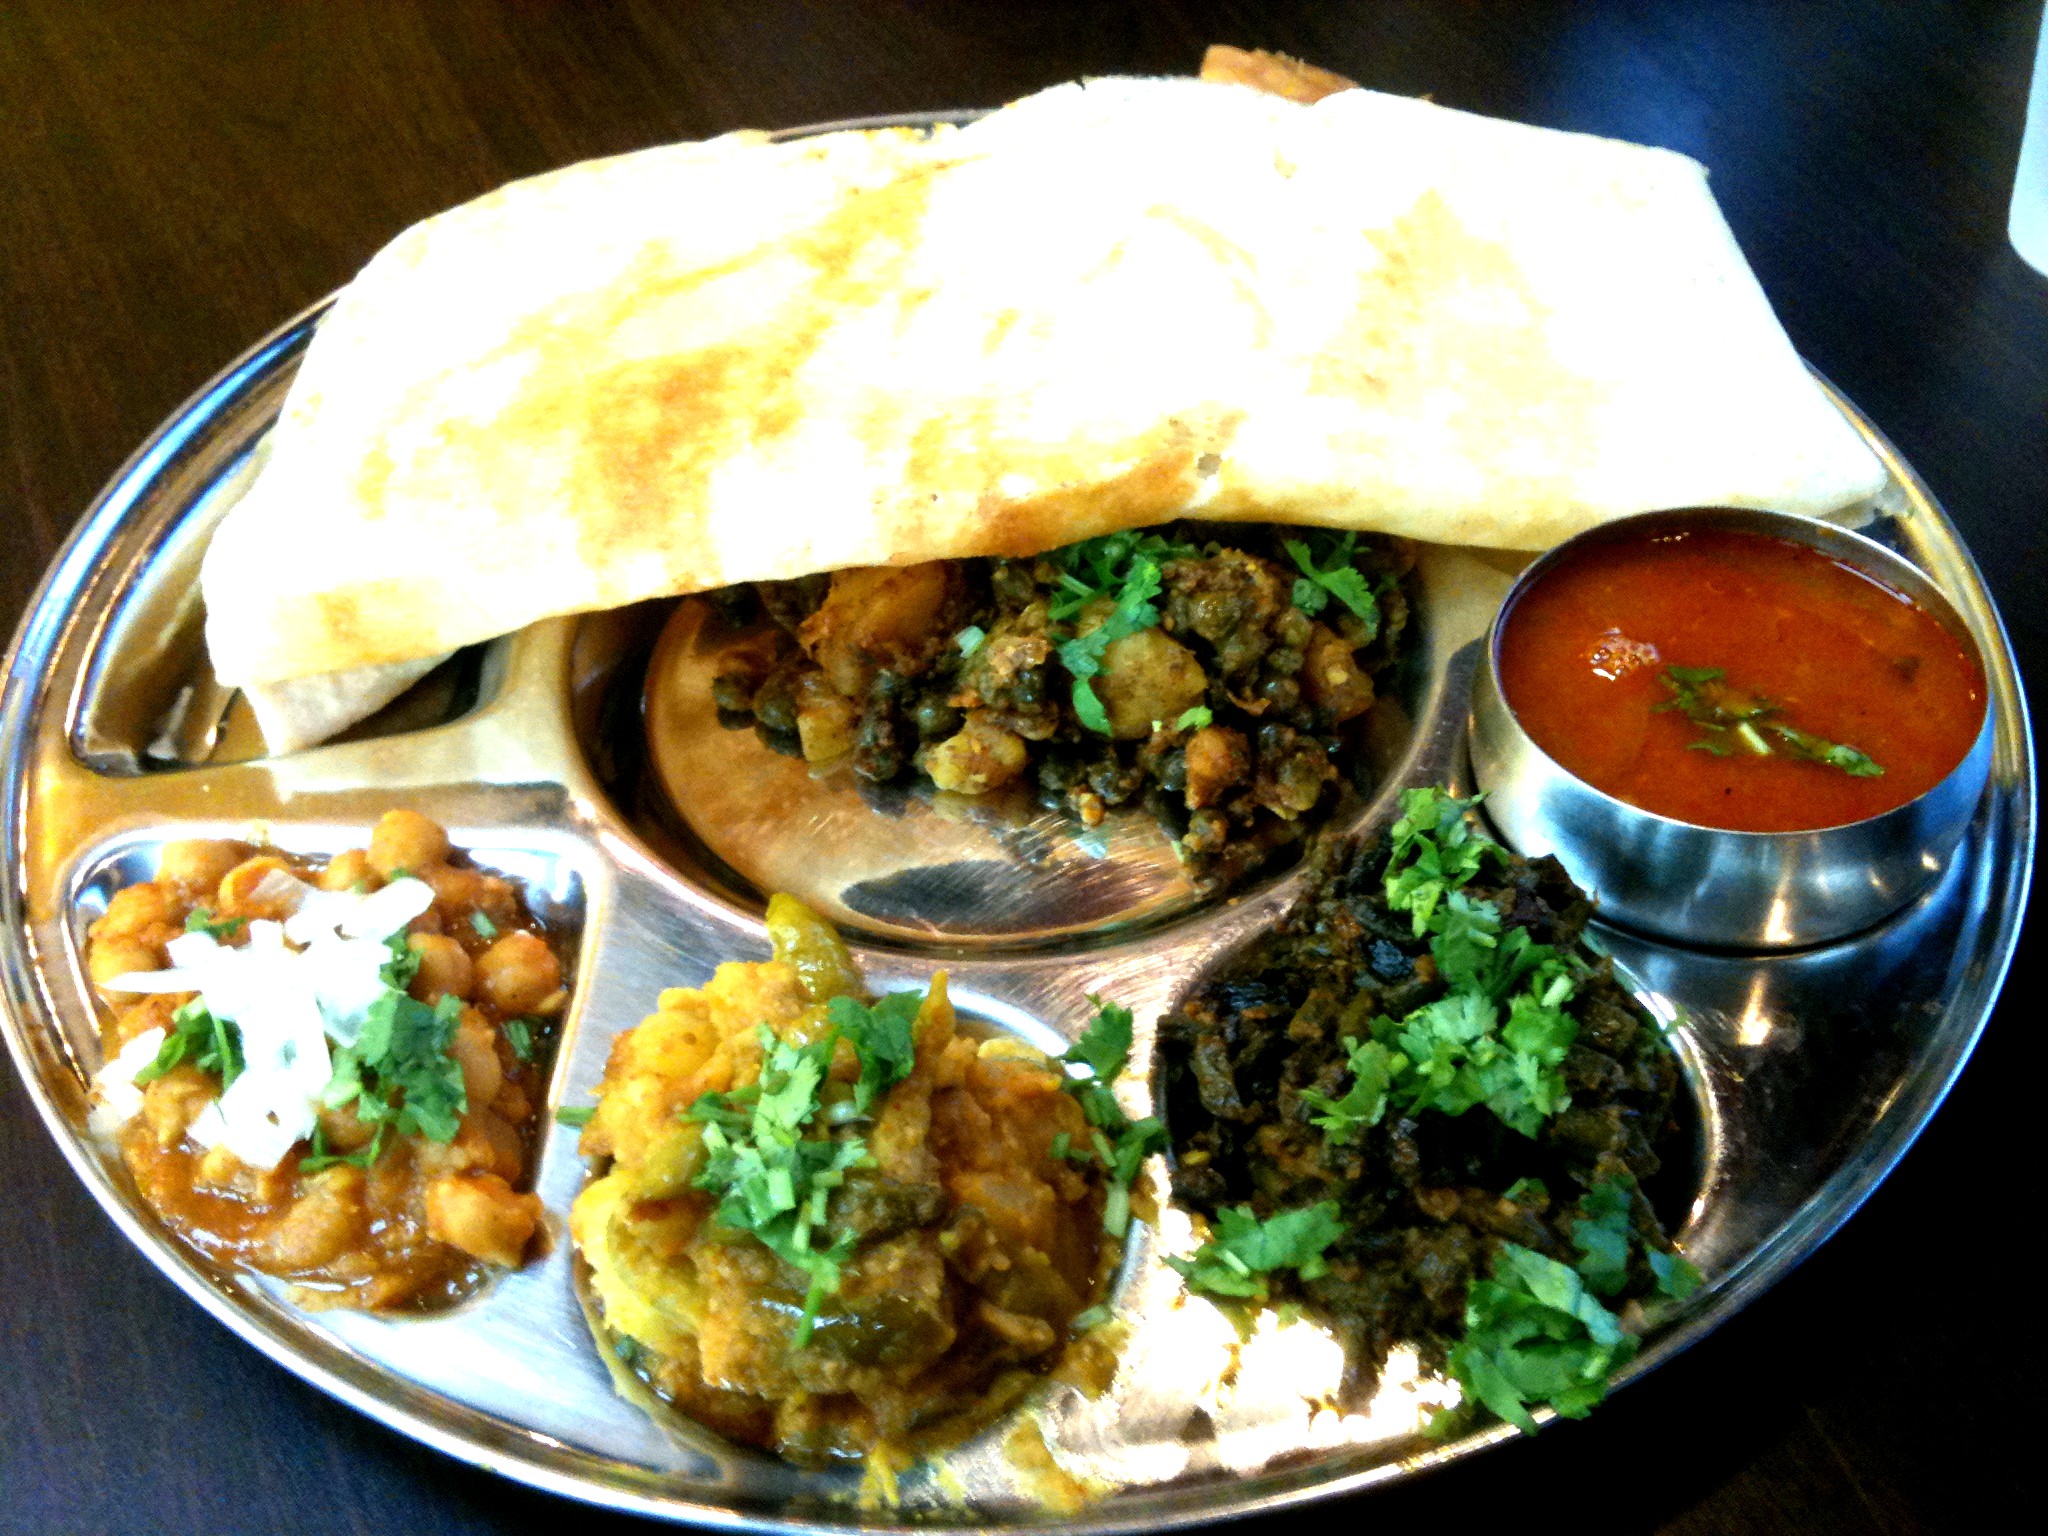 a plate is full of different indian food